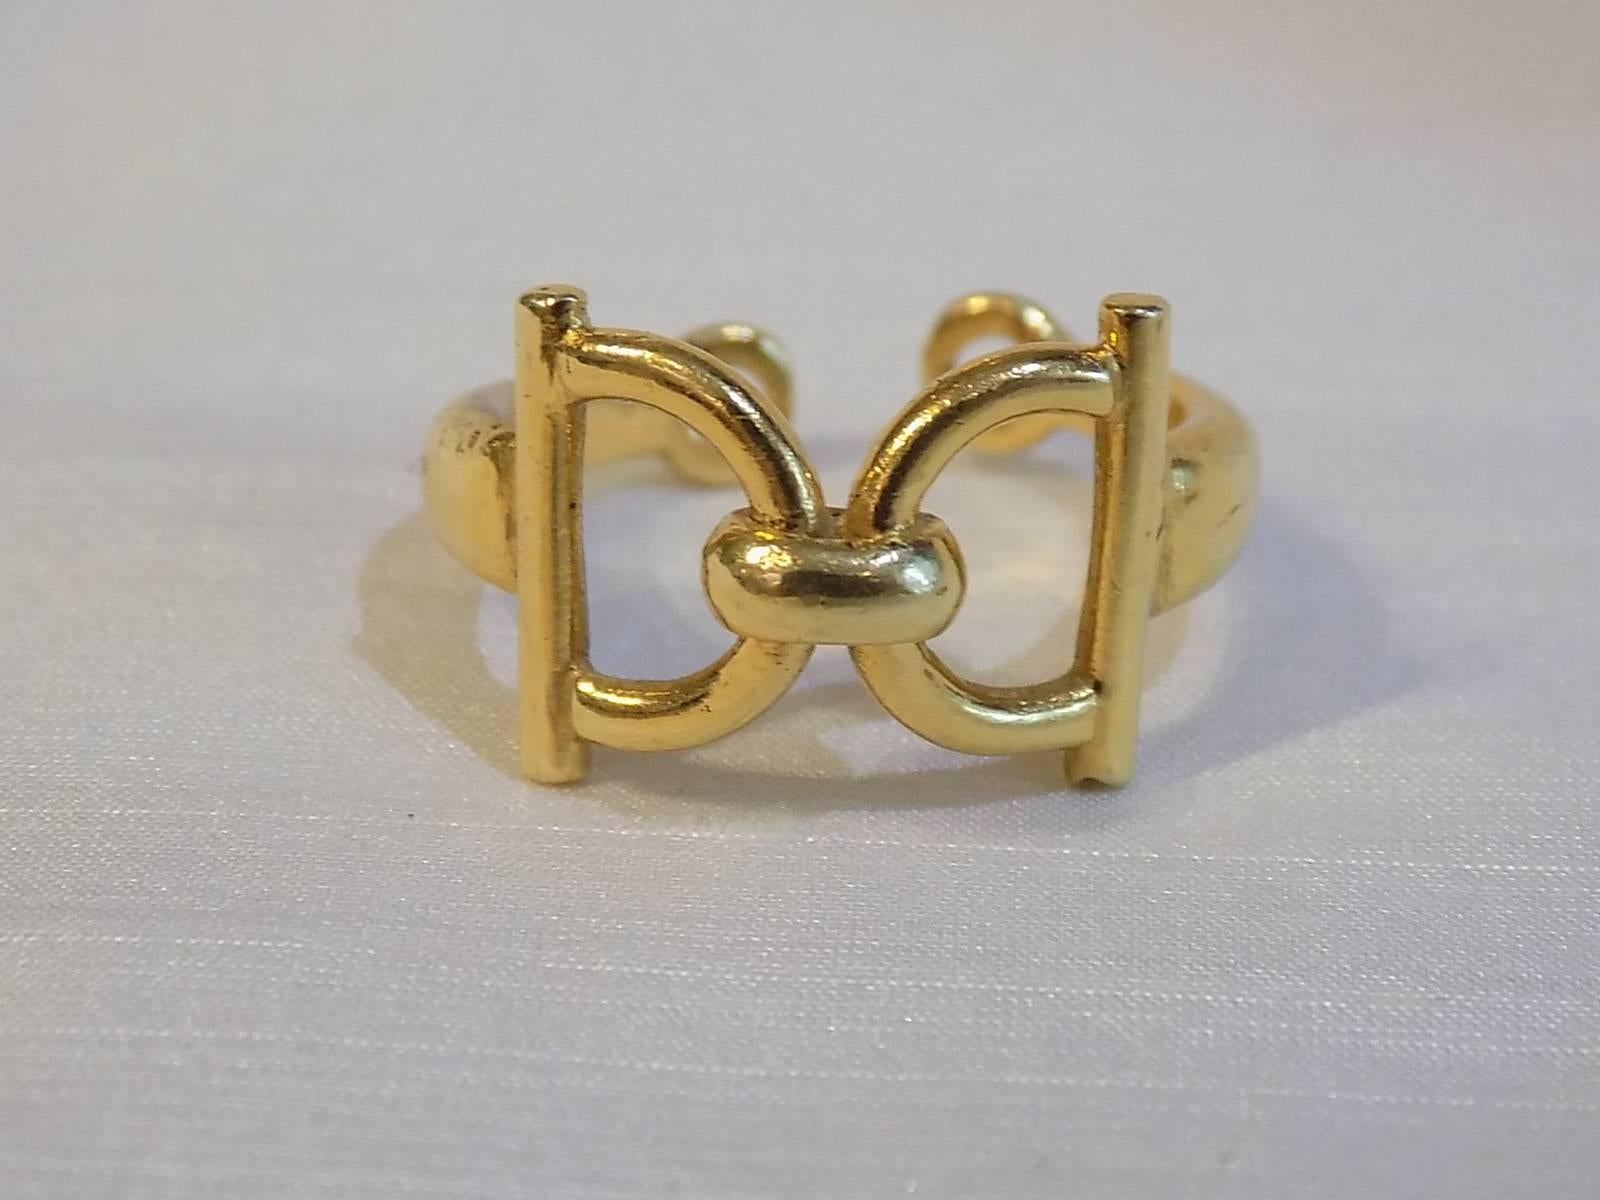  Vintage Gucci Horsebit Gold Open Ring   In Fair Condition For Sale In New York, NY